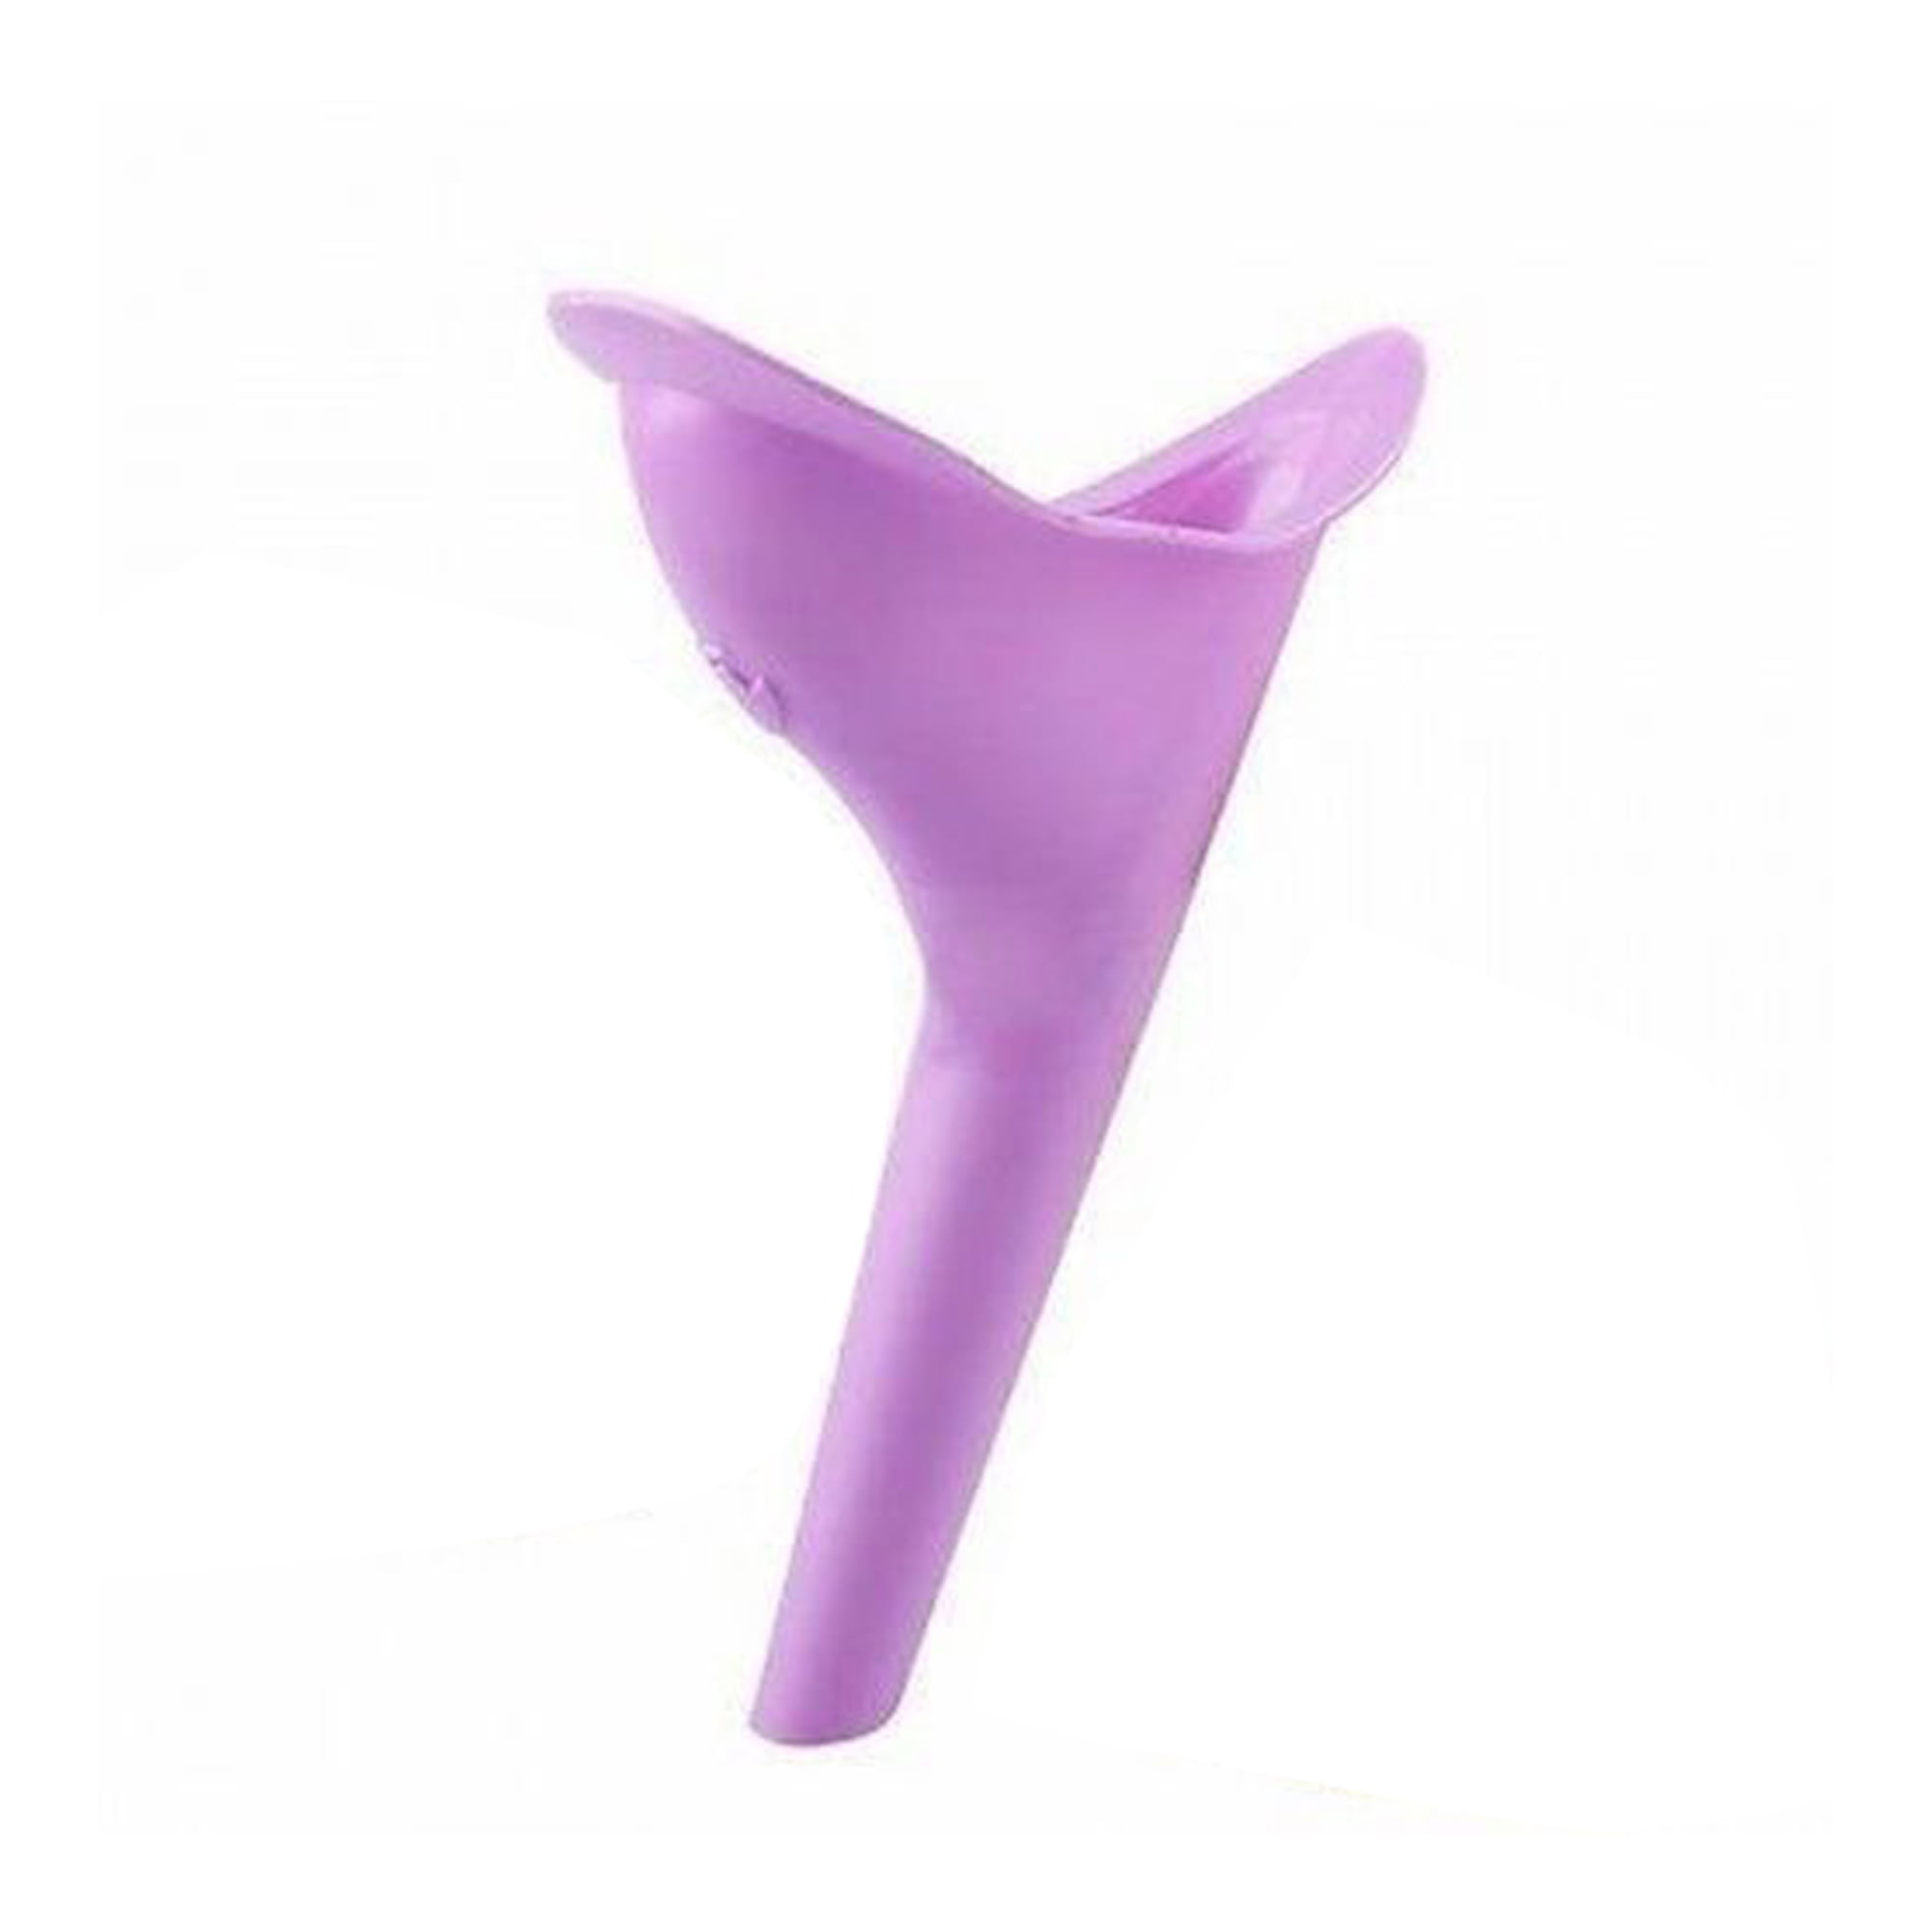 Urinal Funnel Portable Travel Urine Camping Device Toilet Lady Women Pee 